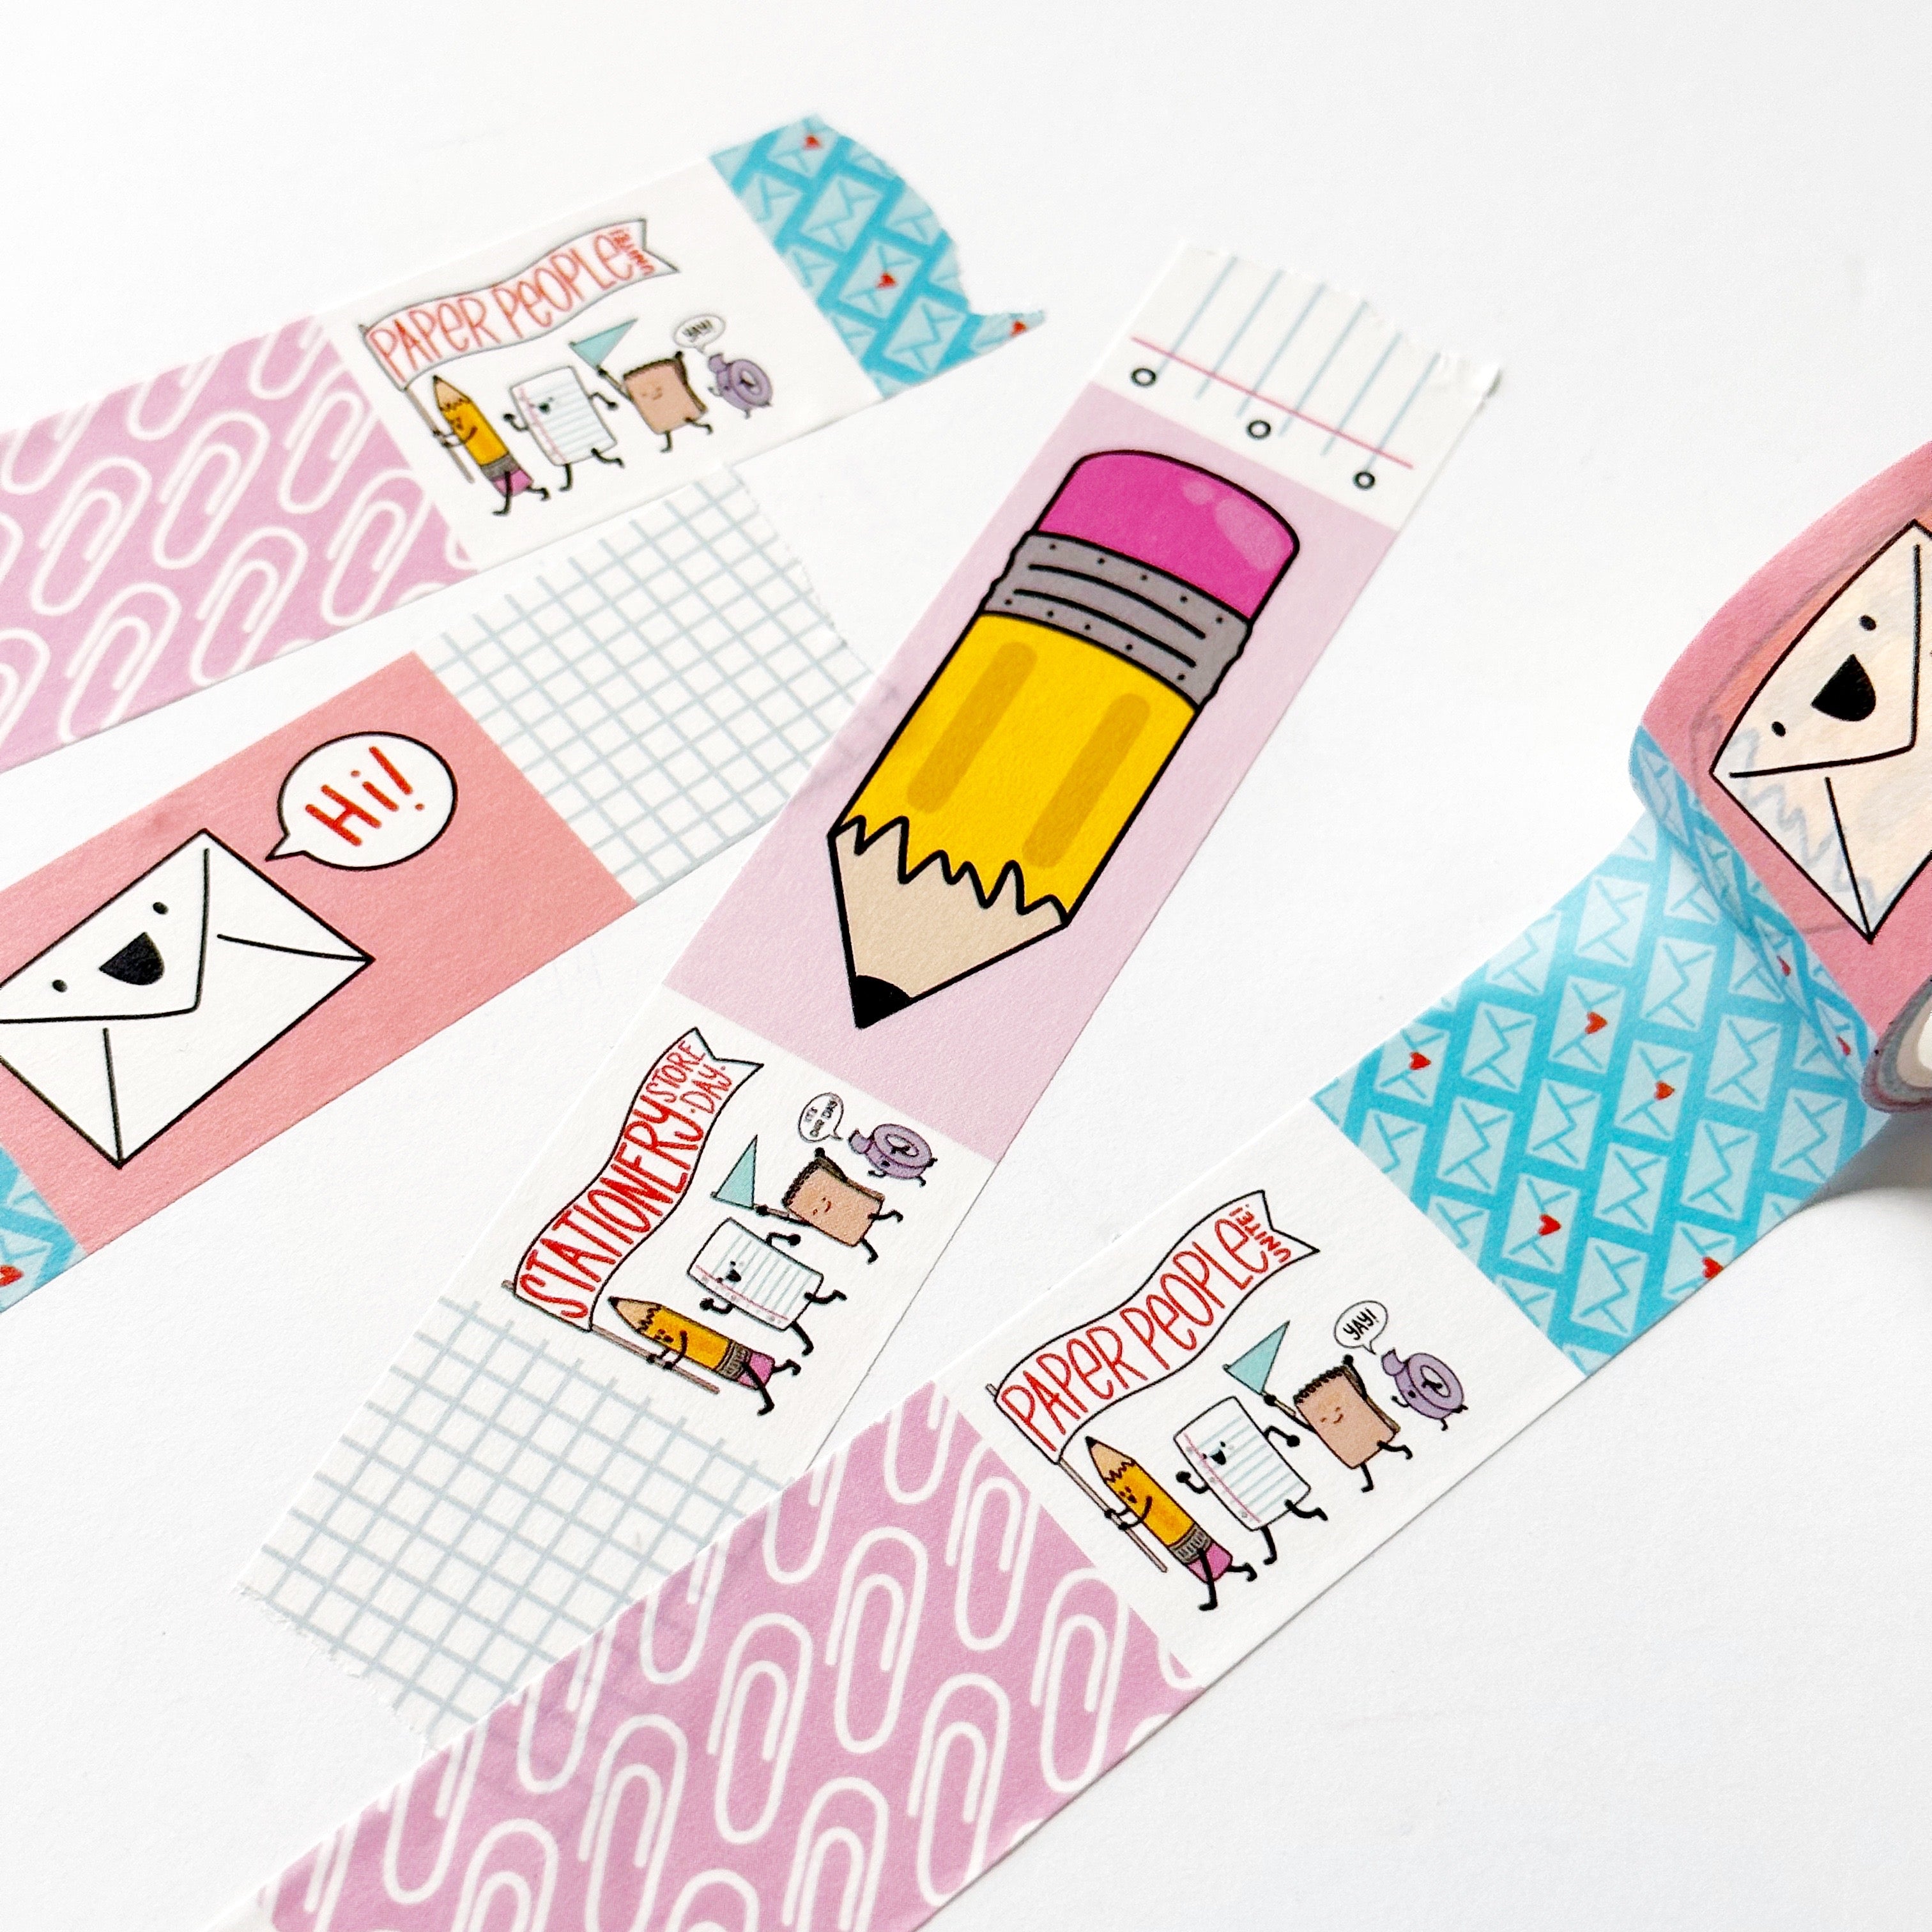 Image of stamp washi tape with images of yellow and pink pencil, pink background with white paperclips, blue and white striped and blue and white checked, pink background with white envelope saying "Hi".